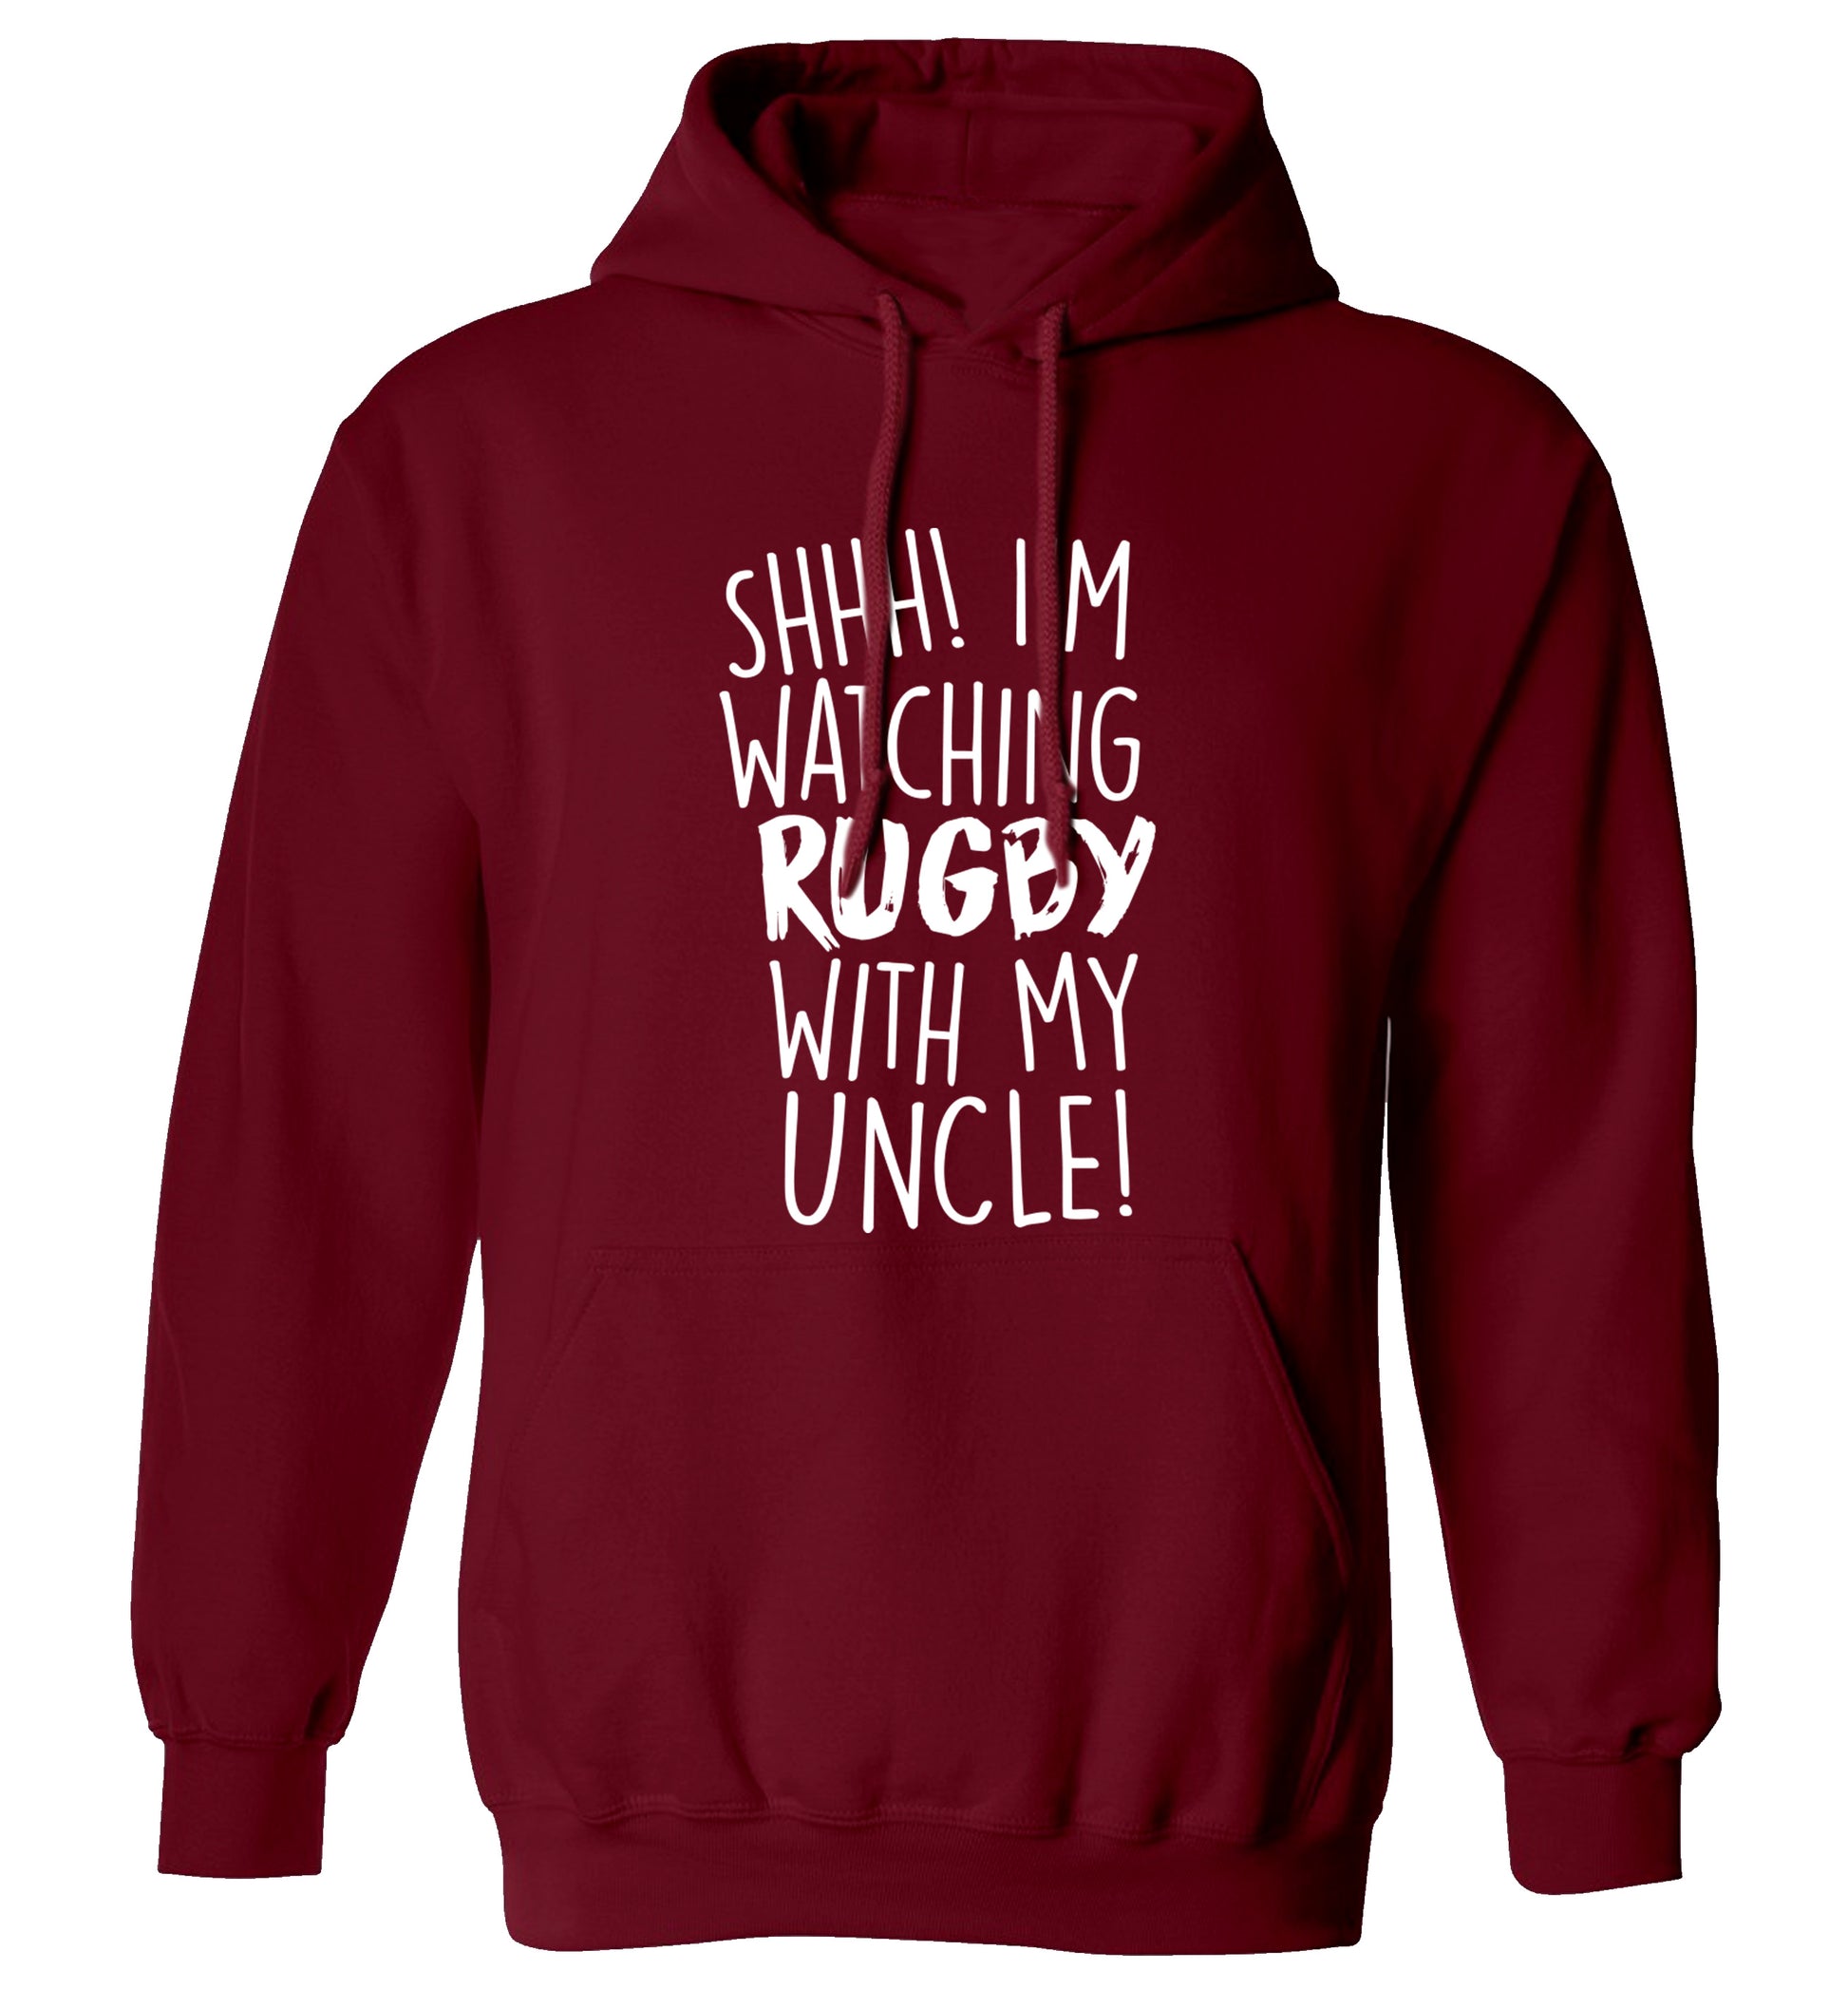 Shh.. I'm watching rugby with my uncle adults unisex maroon hoodie 2XL